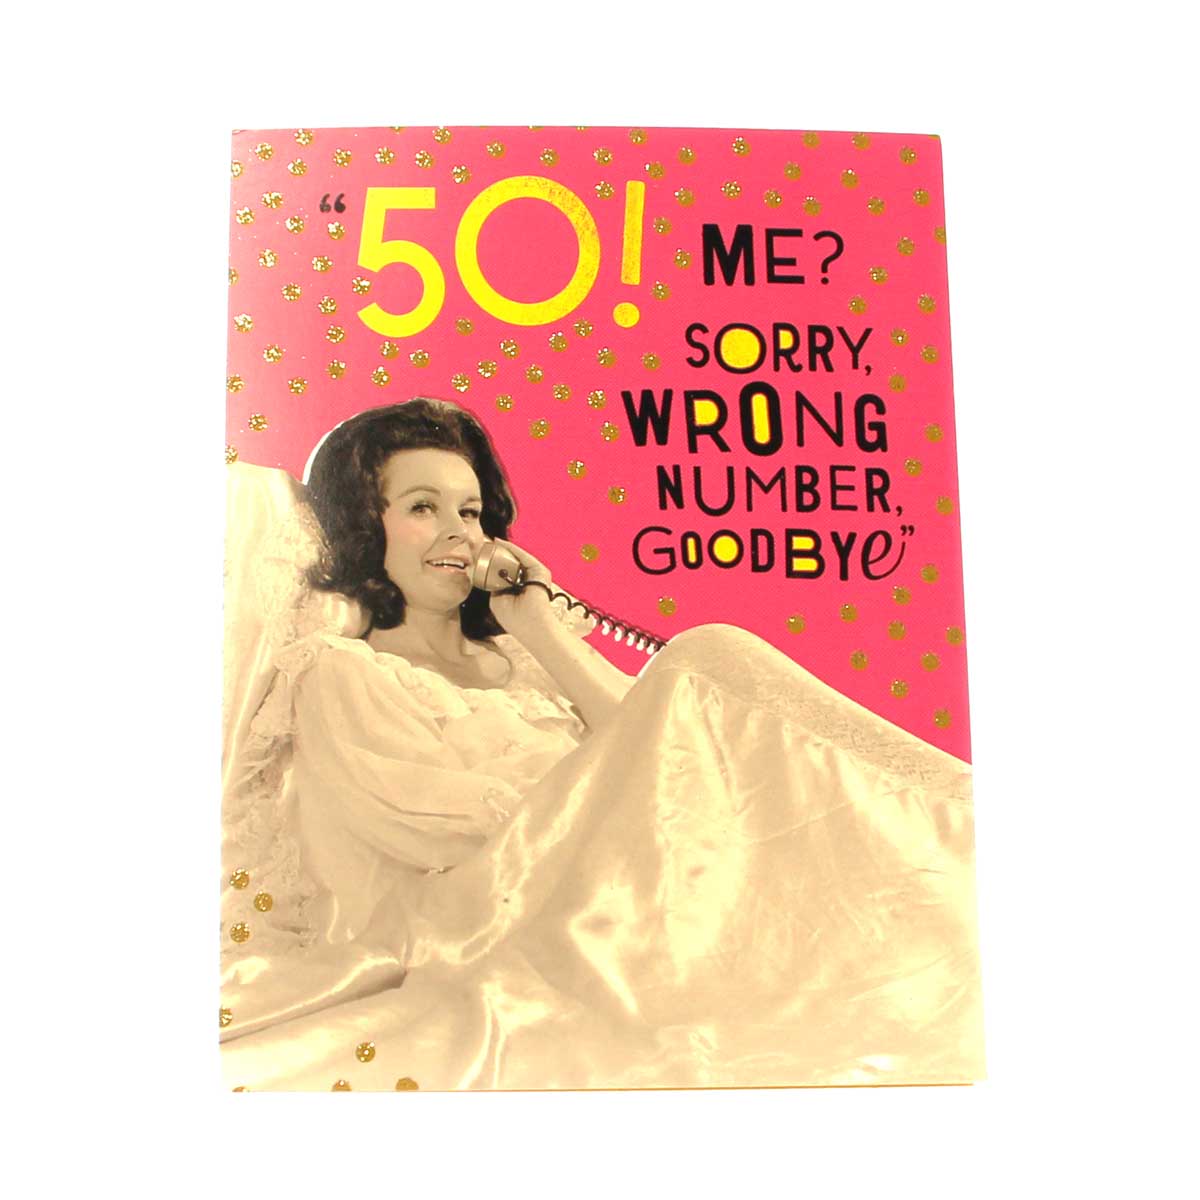 50th Birthday Card: "50! Me? Sorry, wrong number..?"